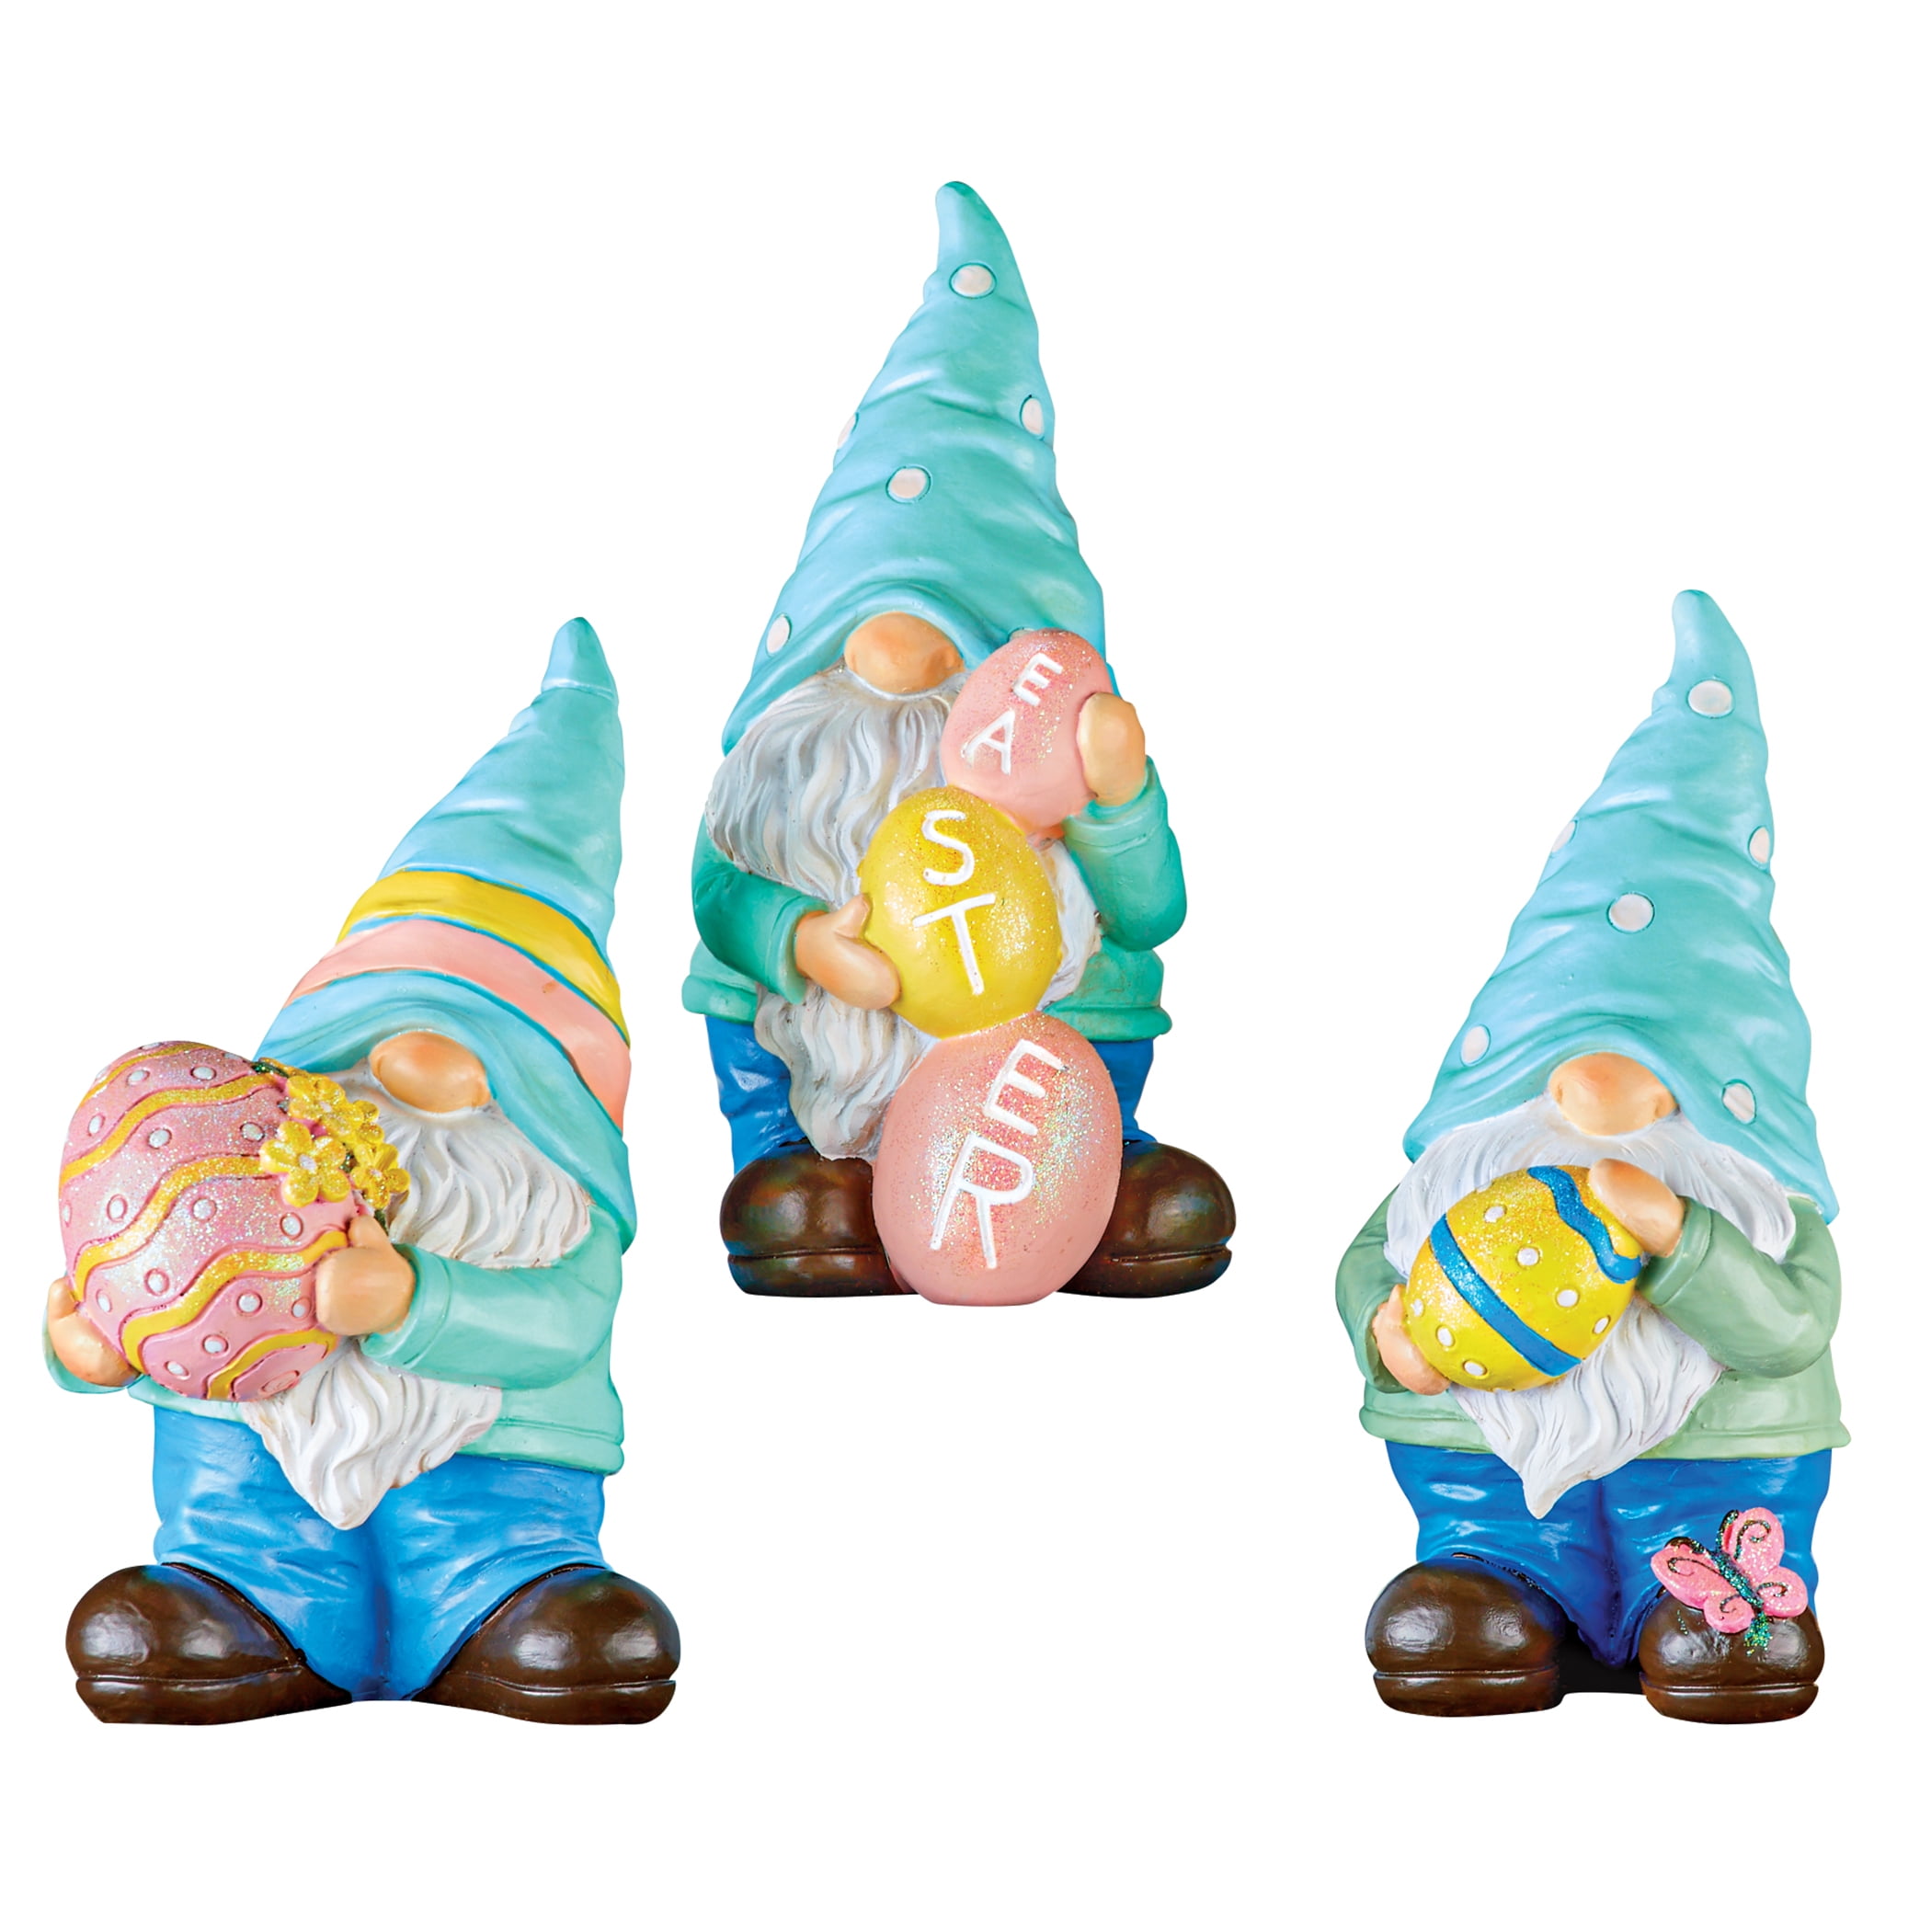 Fullfun® Steel Branch Gnomes Decoration Easter Decor Garden Tree Decoration Mini Garden Gnome Garden Yard Art Indoor Outdoor Ornament Easter Yard Signs Decorations Outdoor A